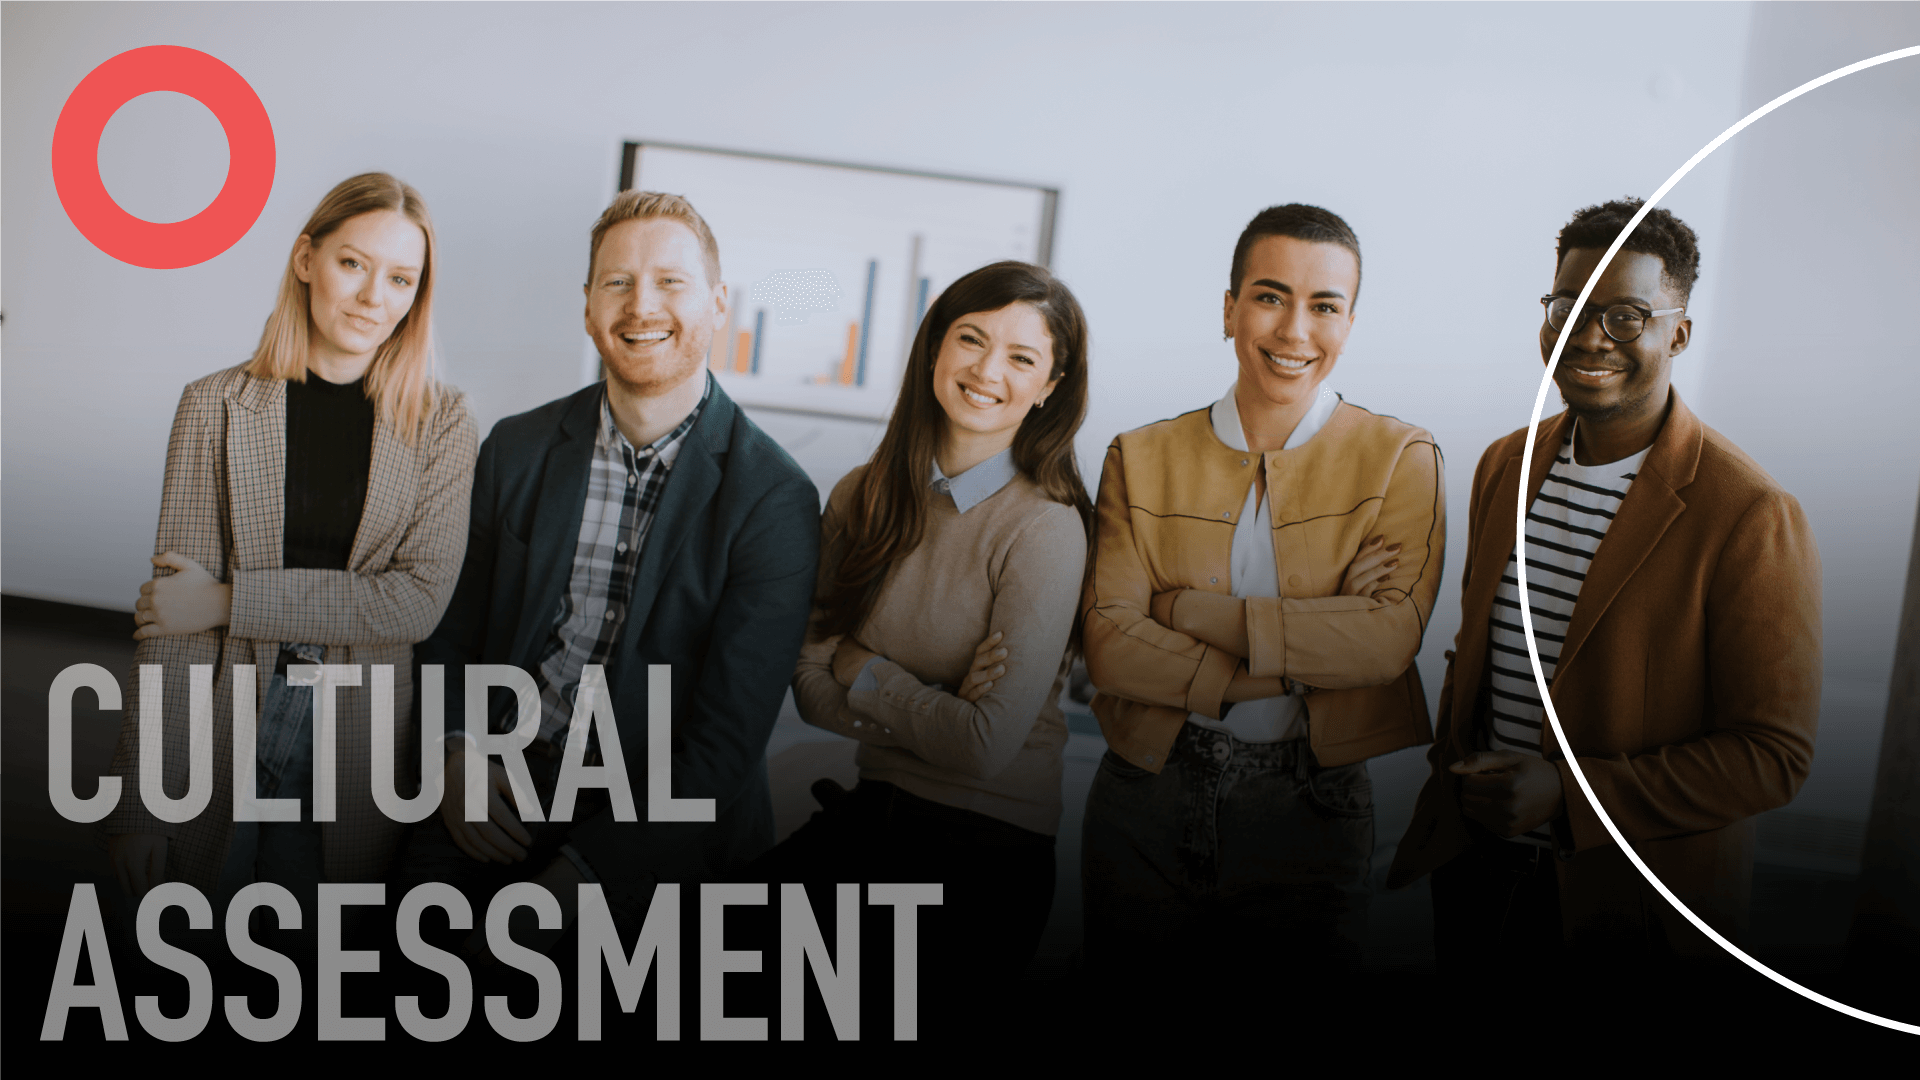 Cultural Workplace Assessment offers insights for organizational enhancement in your business.